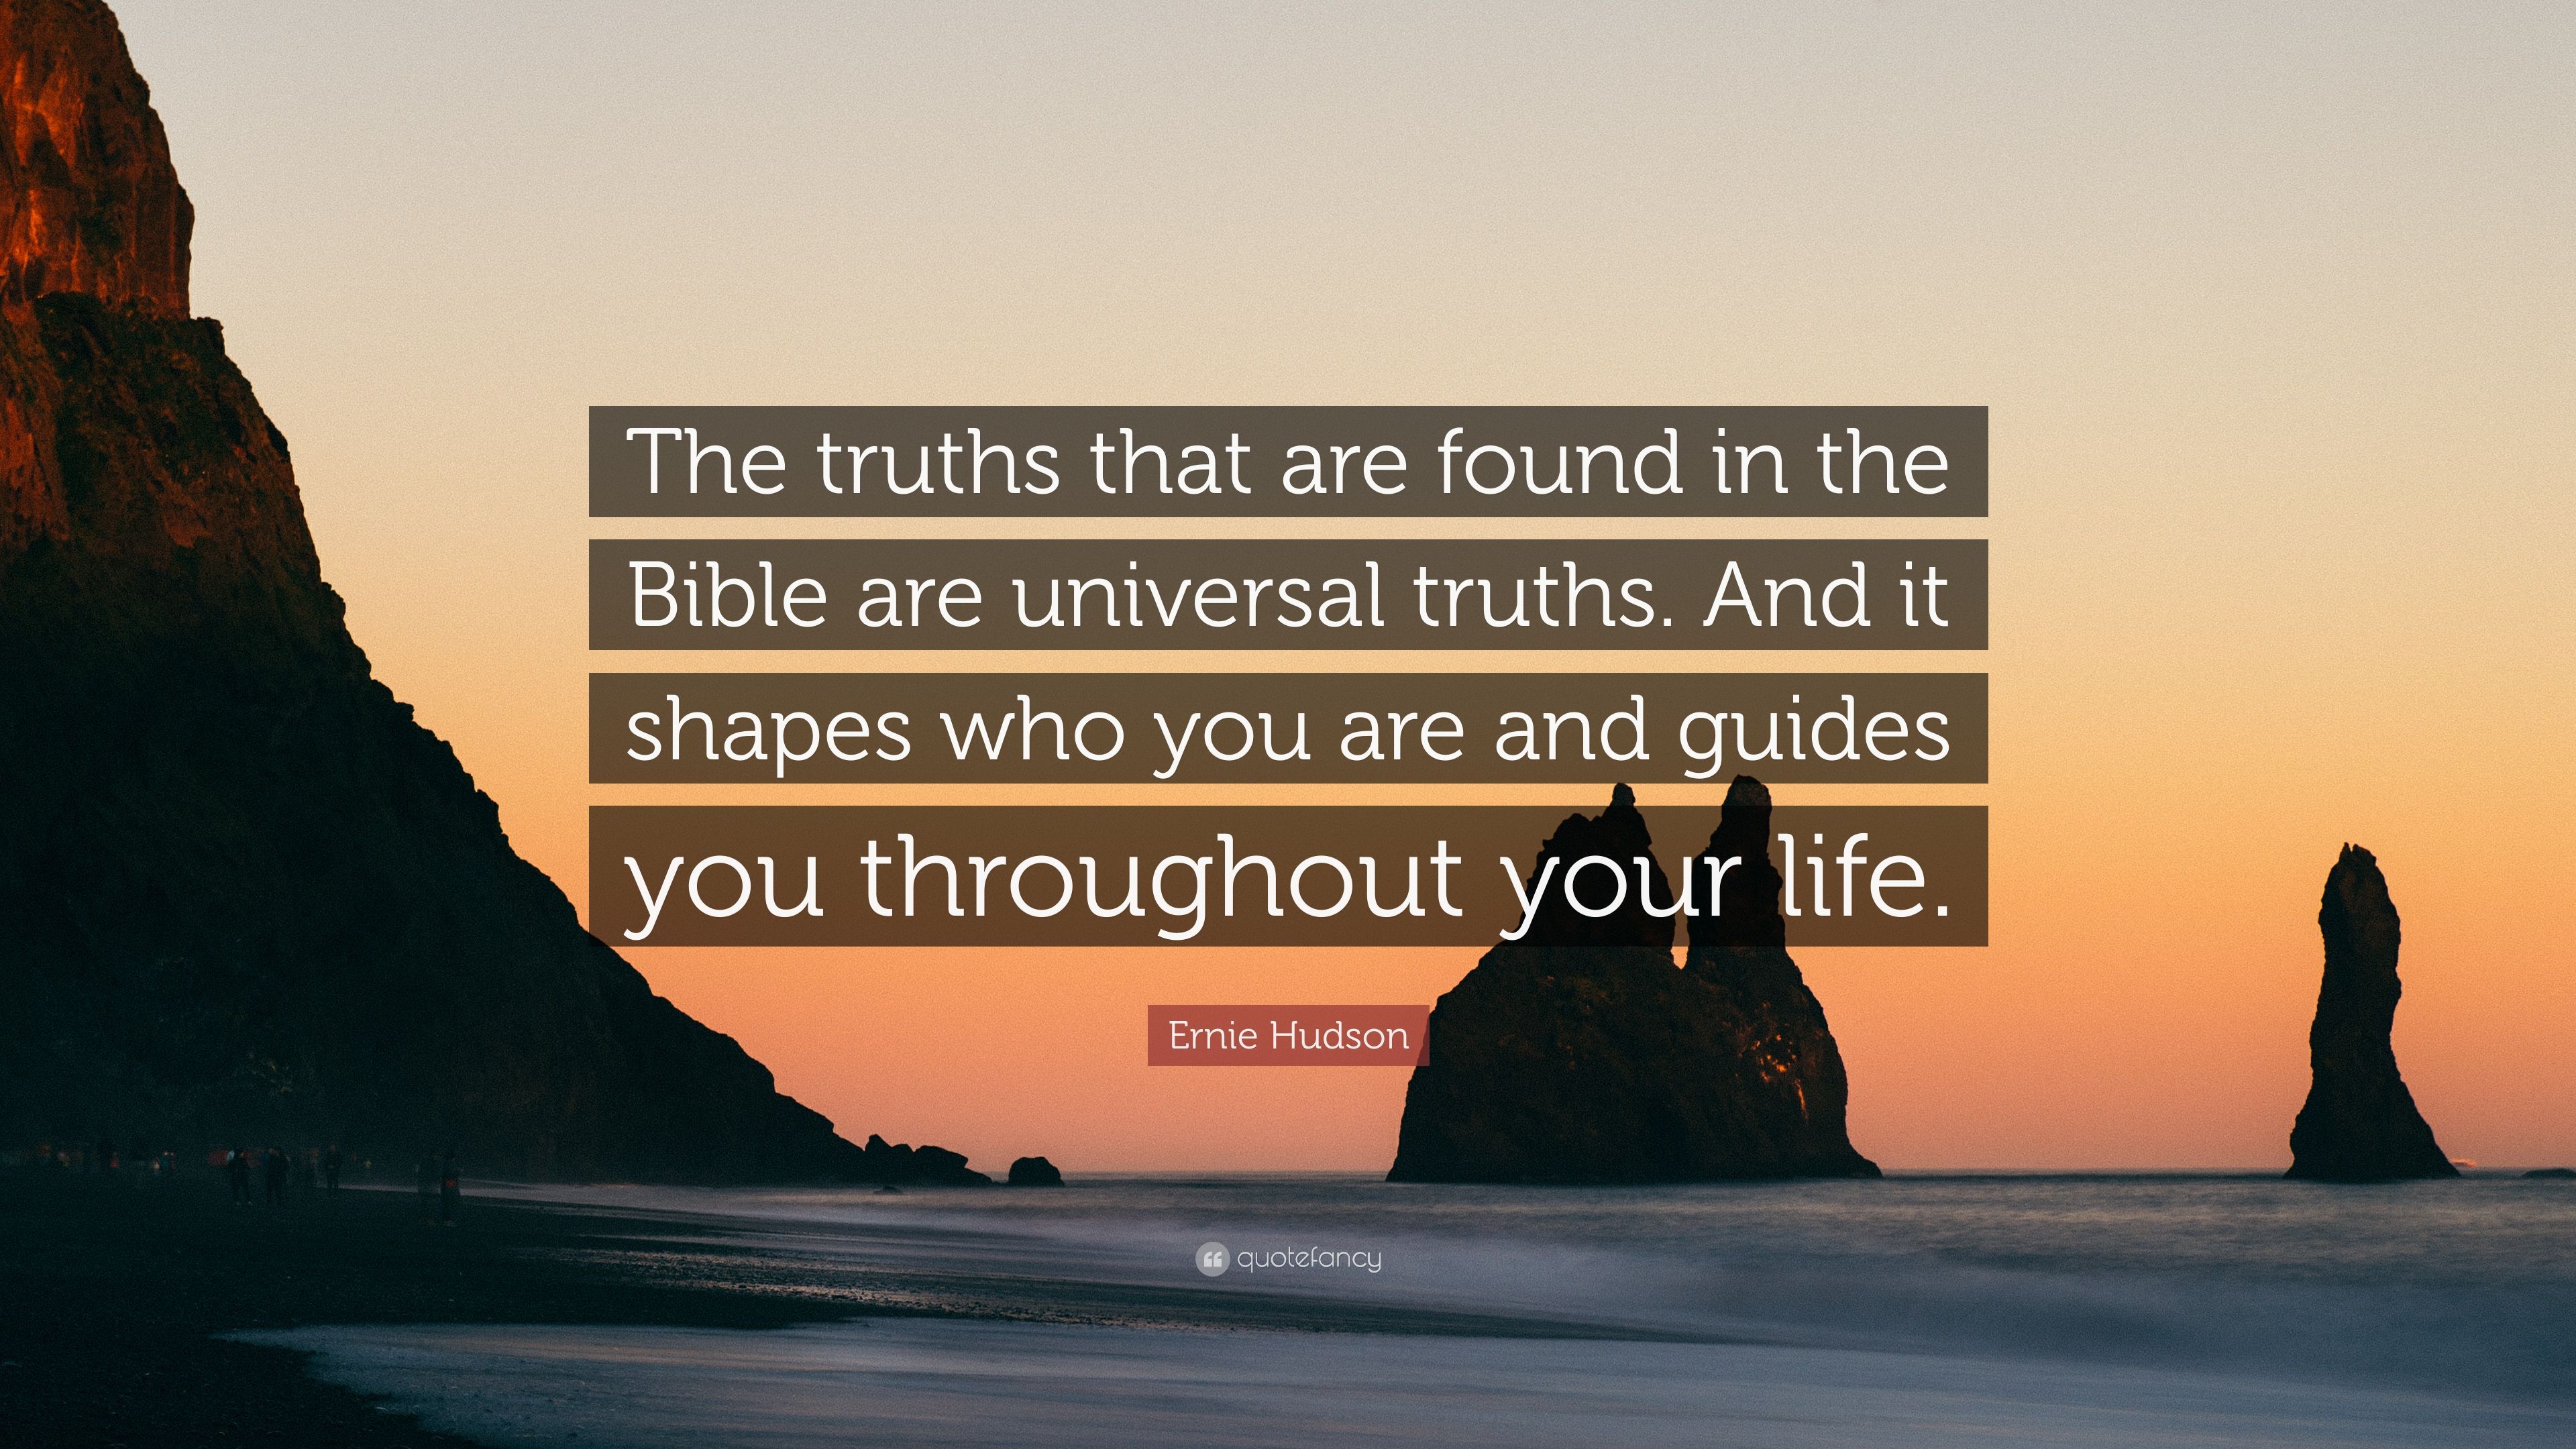 Ernie Hudson Quote: “The truths that are found in the Bible are